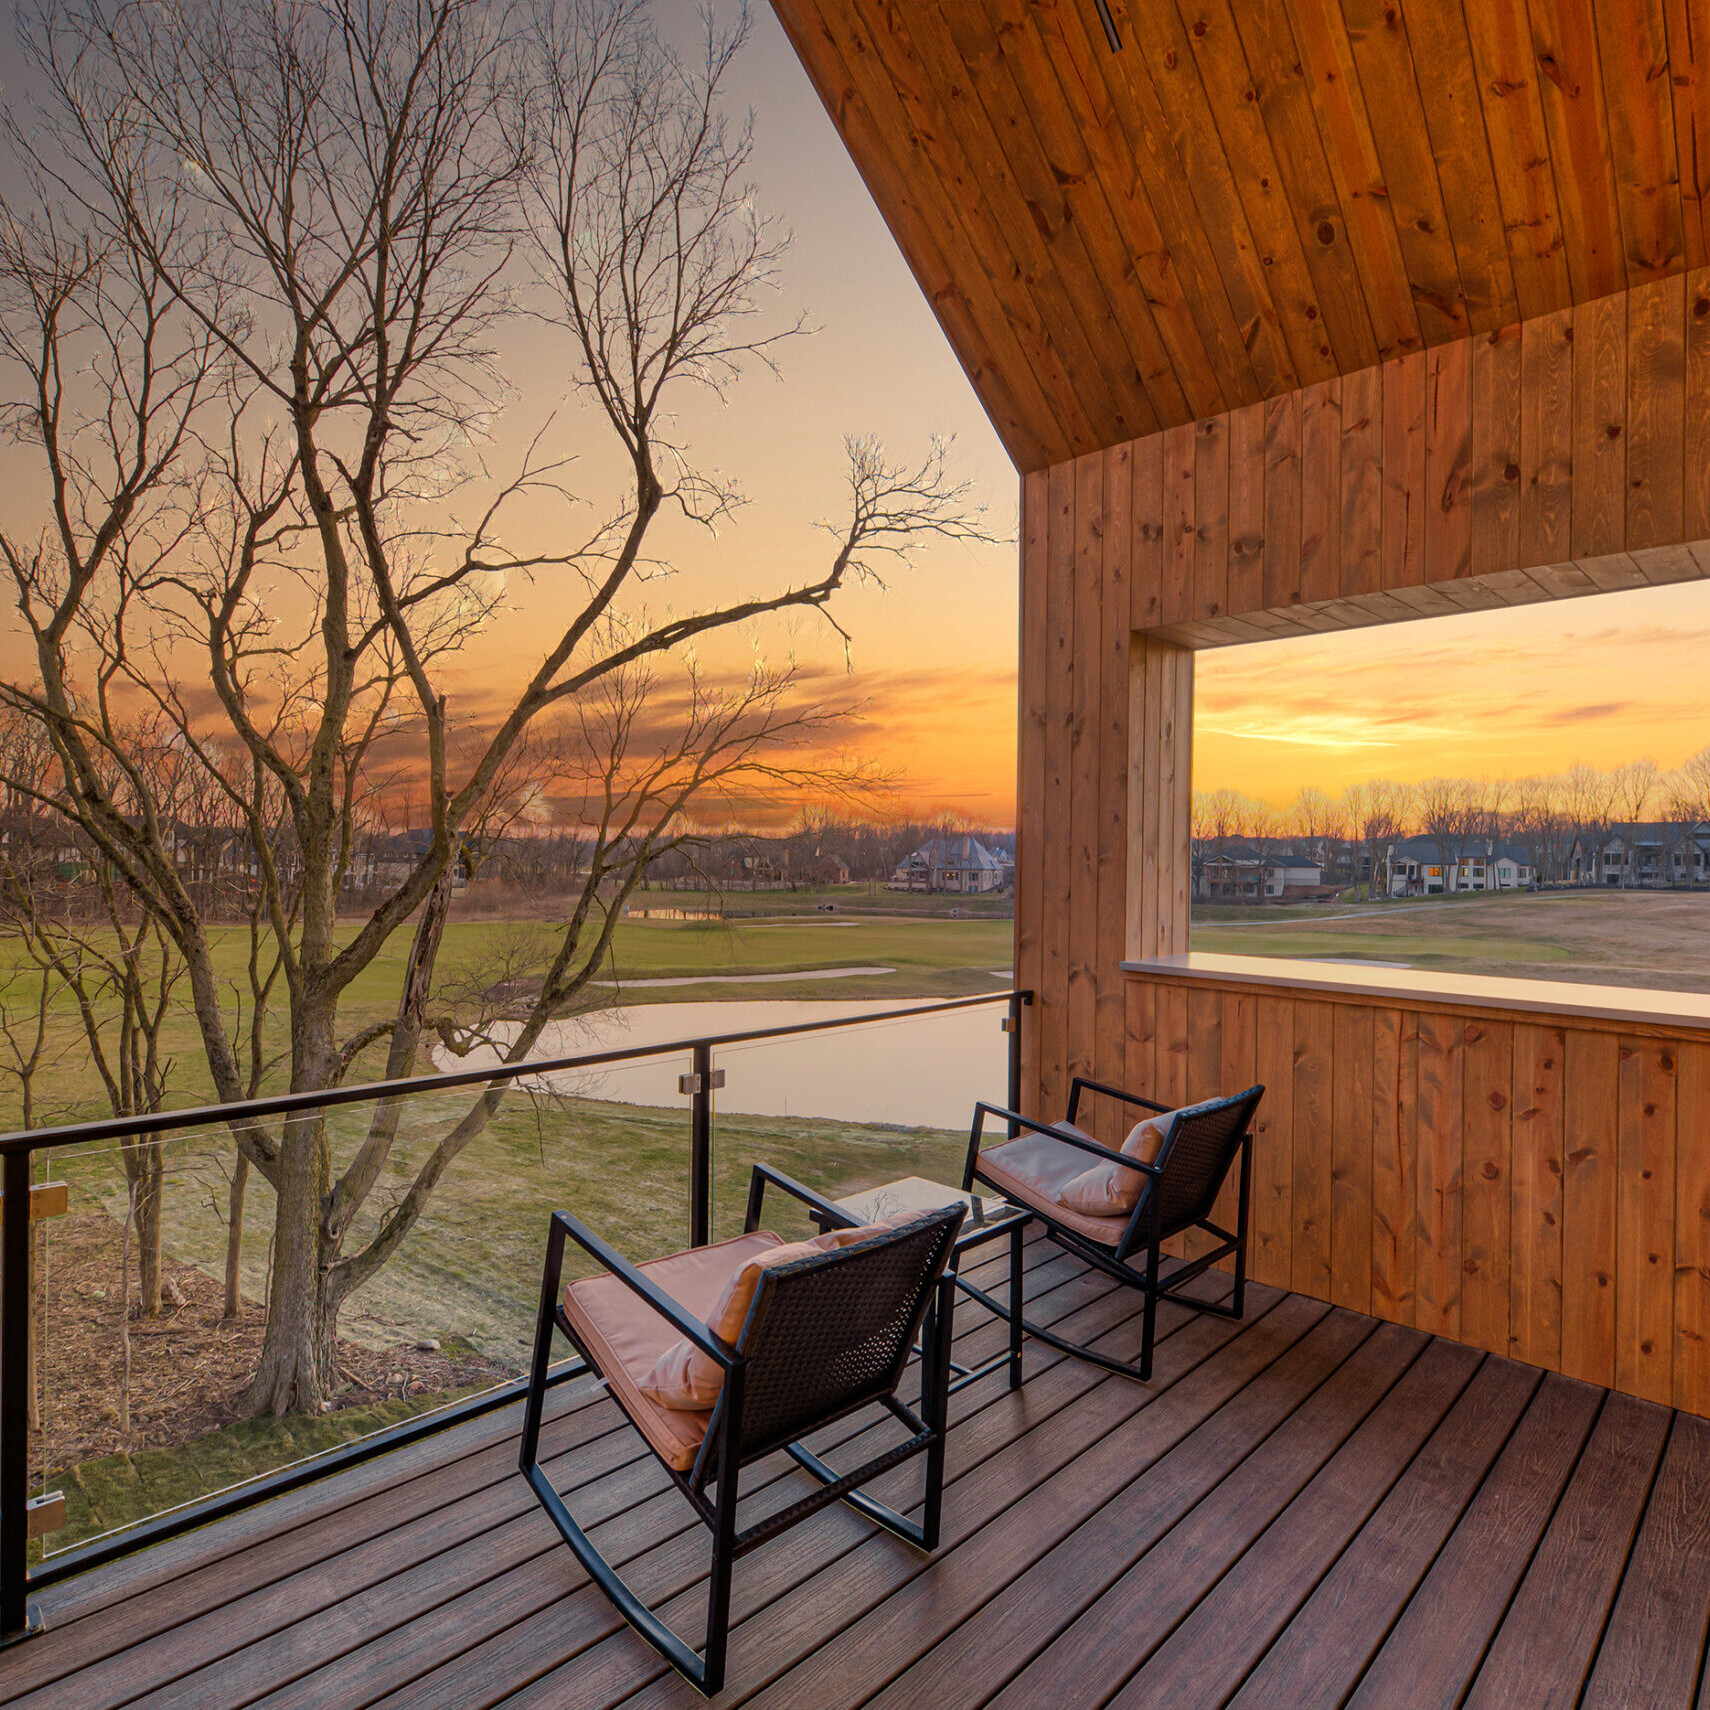 A wooden deck with a view of a field.